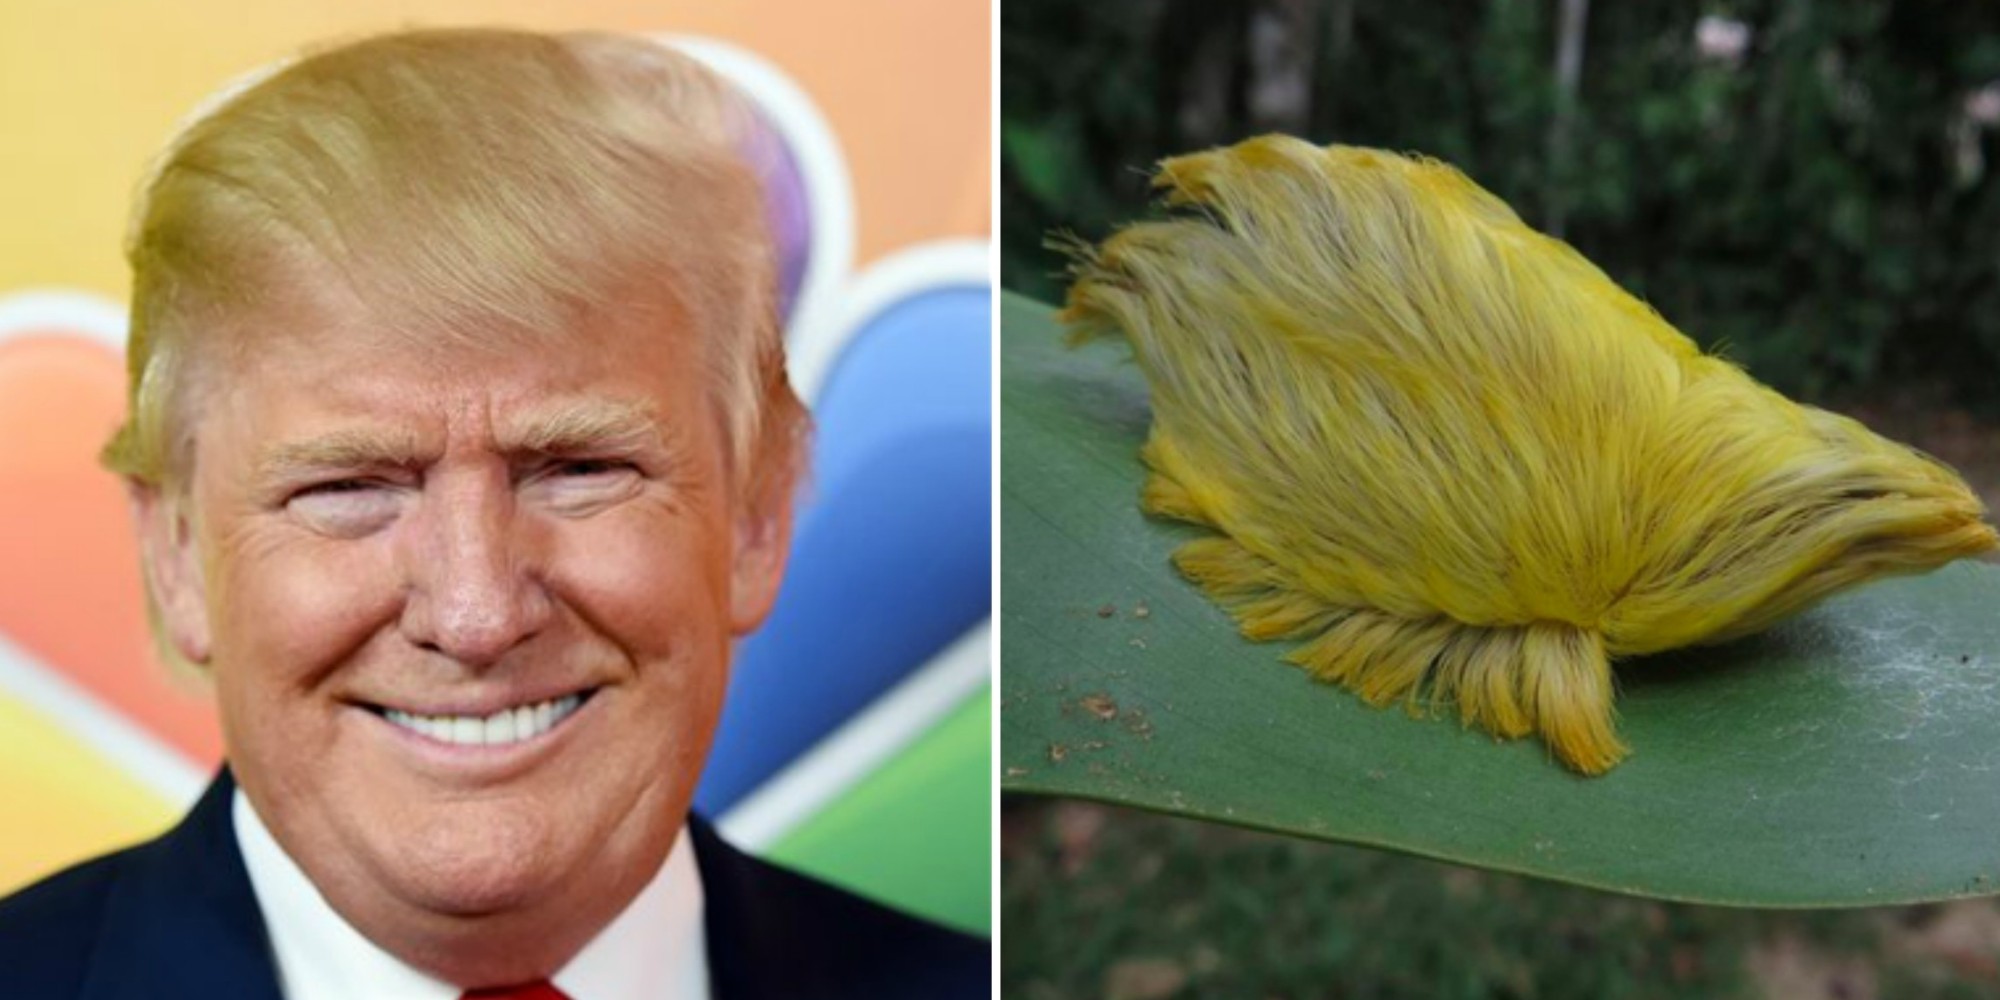 Donald Trump Is Running For President. Here Are 11 Animals Who Share